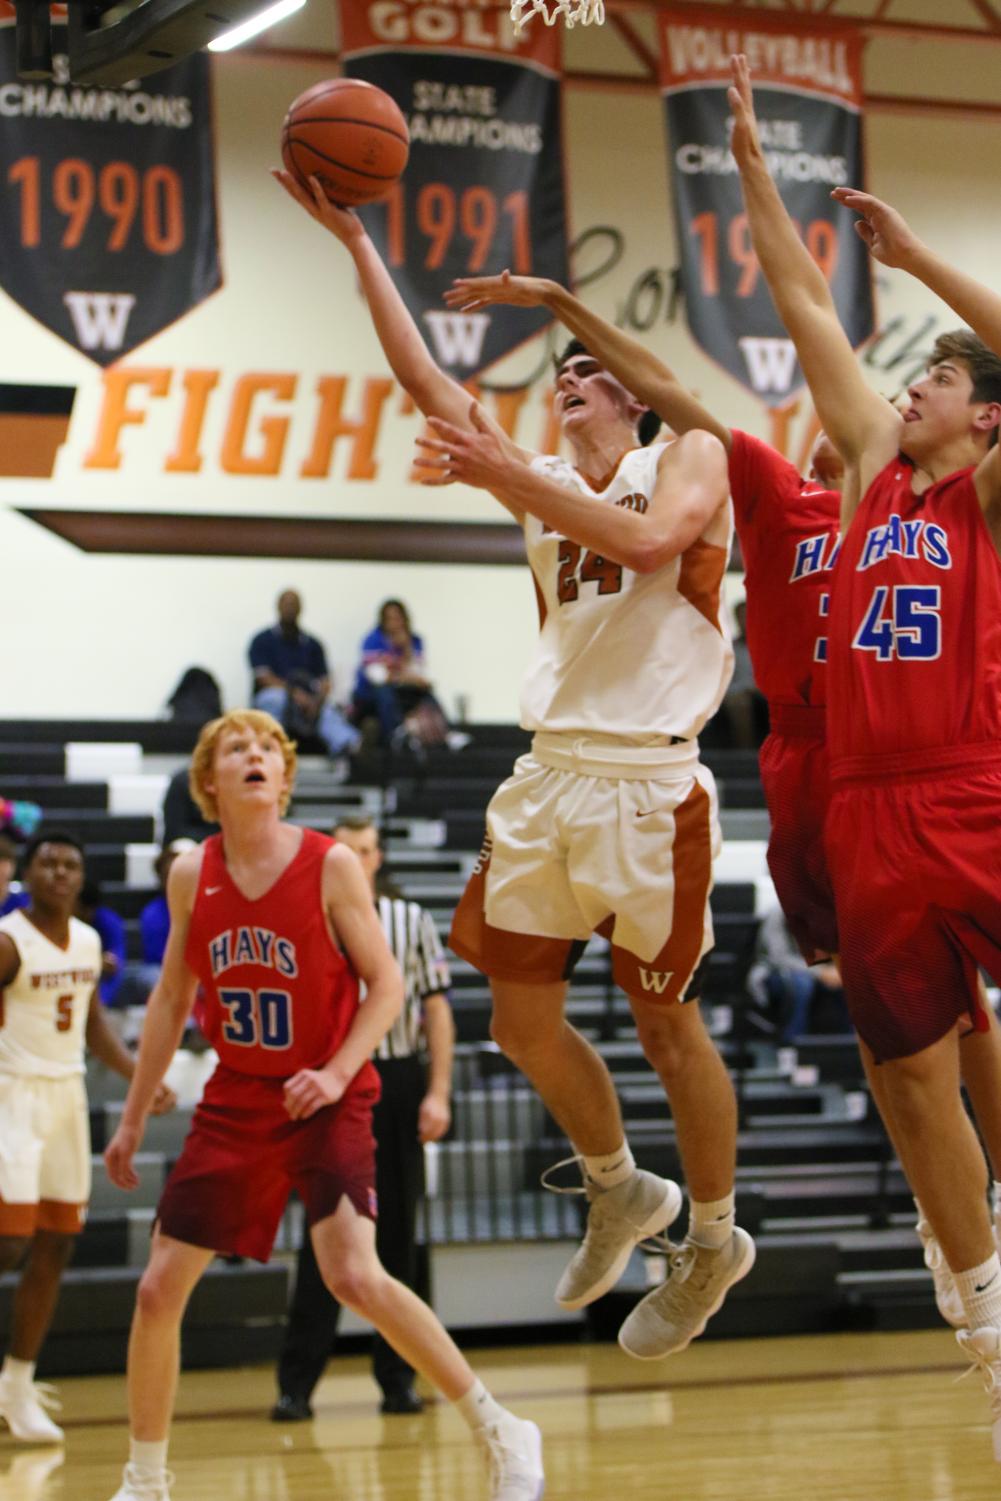 Varsity+Boys+Basketball+Conquers+the+Hays+Rebels+59-49